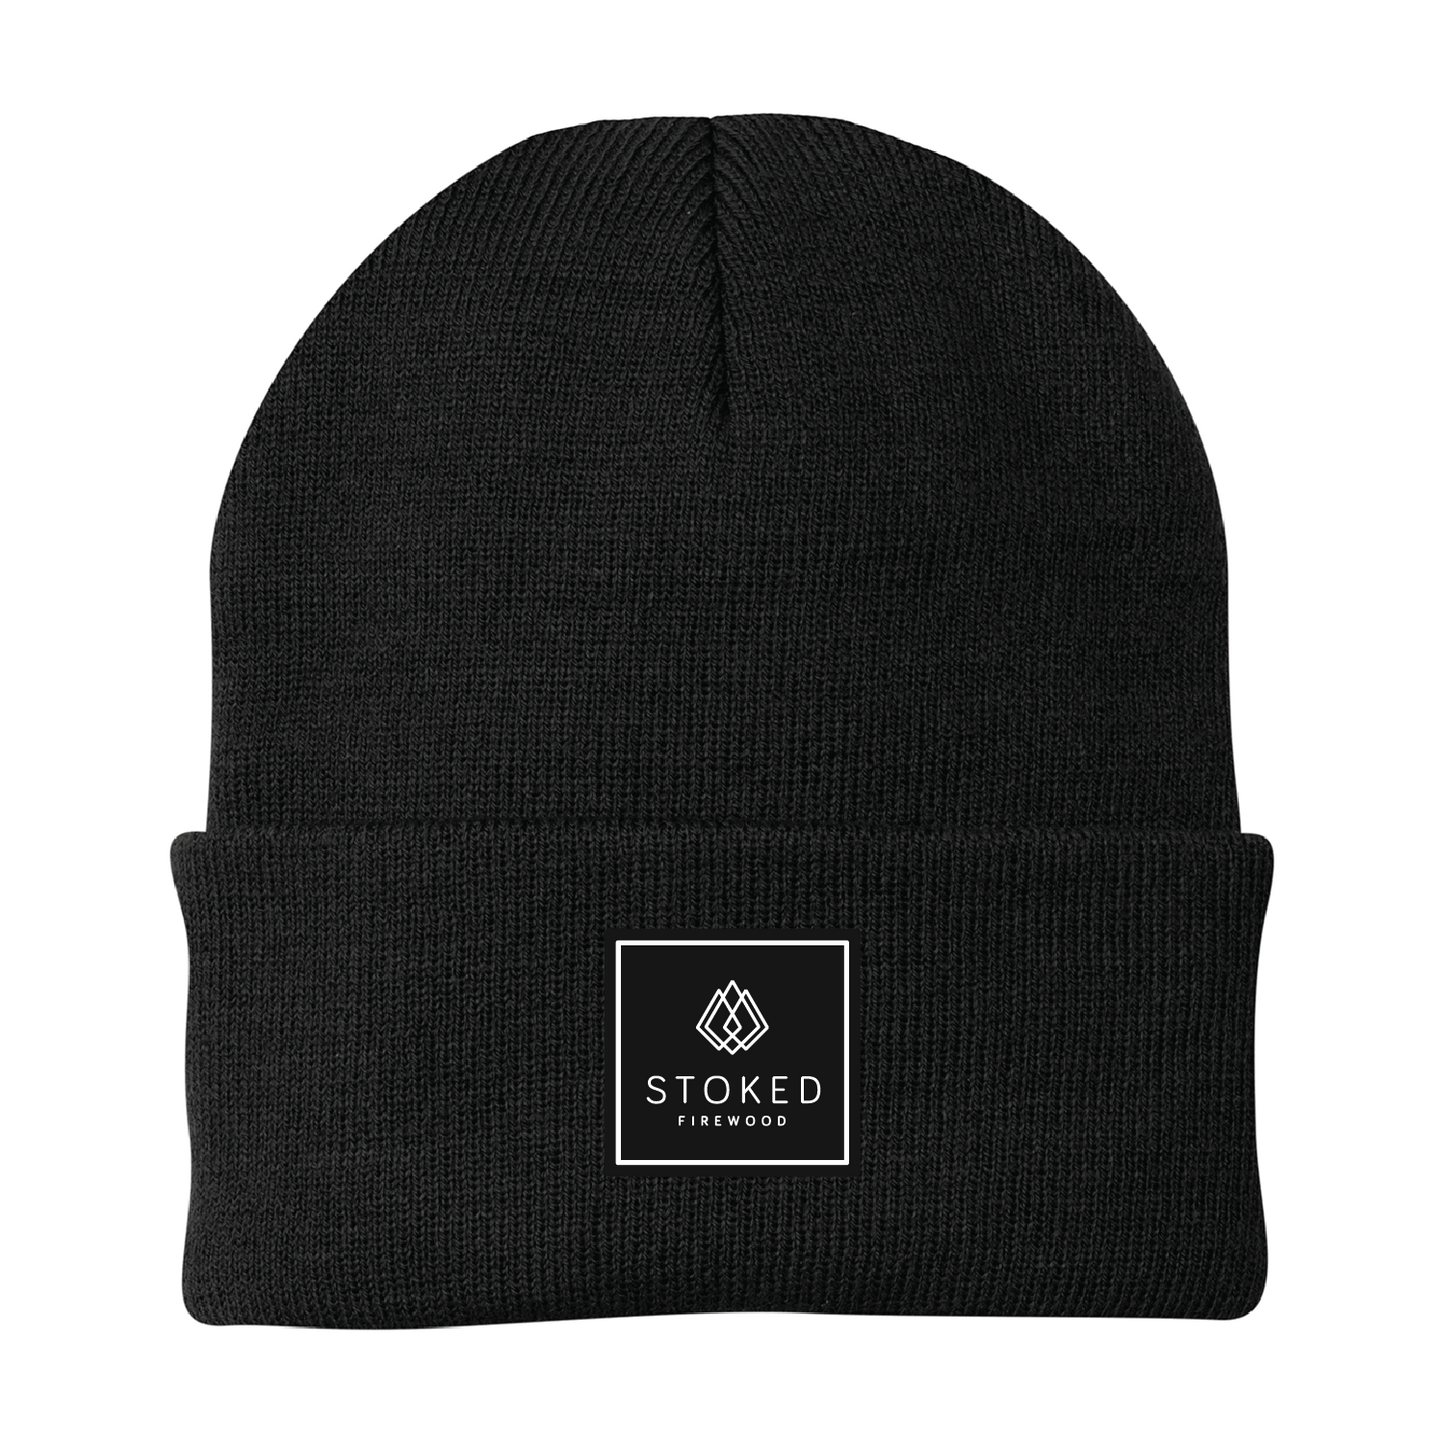 Stoked Firewood Knit Cap - DSP On Demand